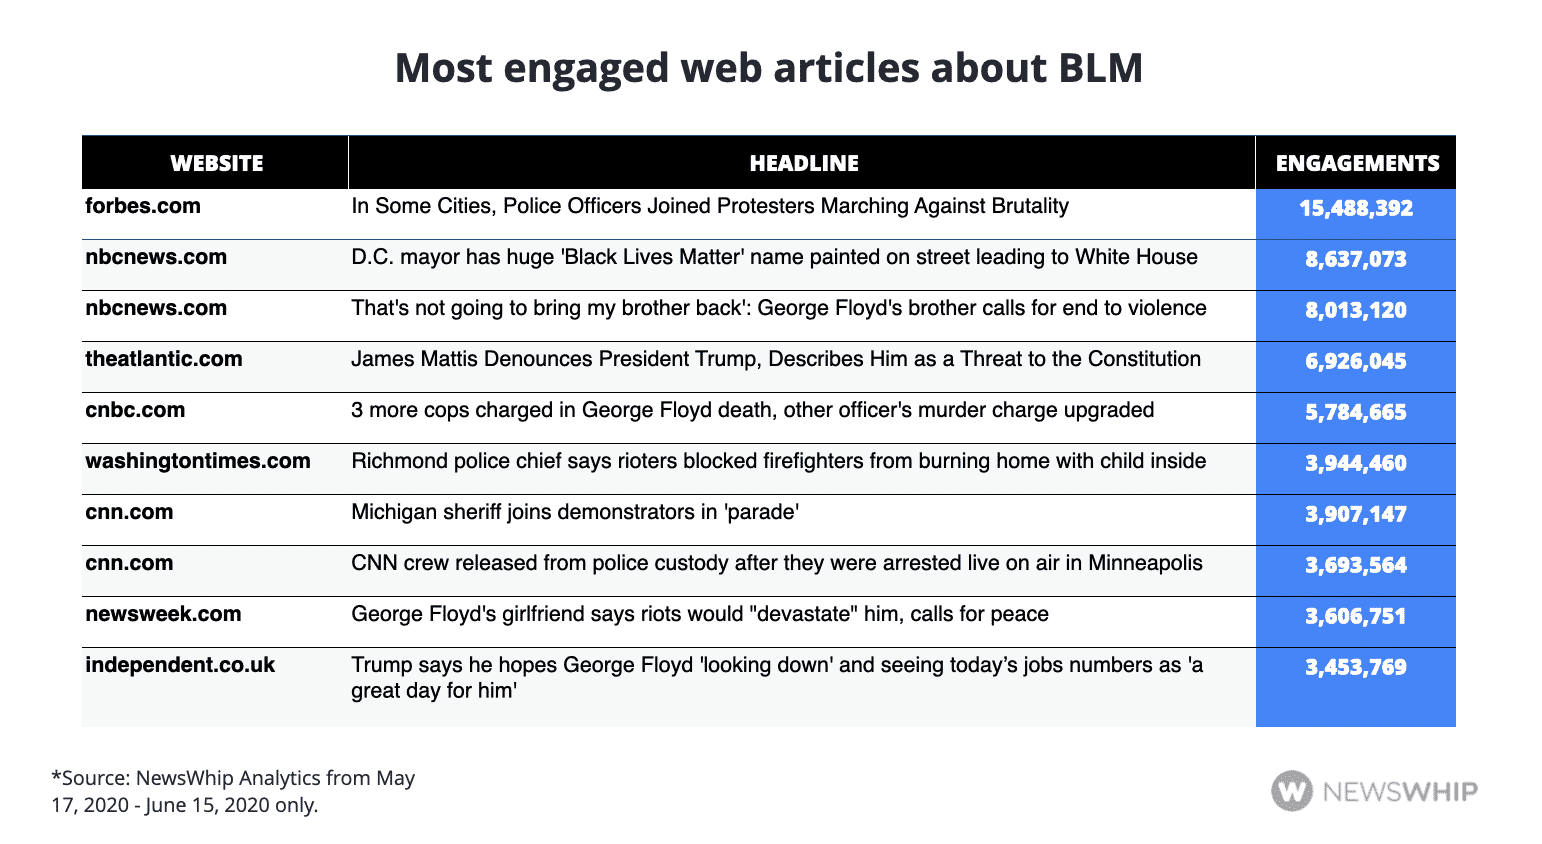 Chart showing the top Black Lives Matter articles, ranked by engagement